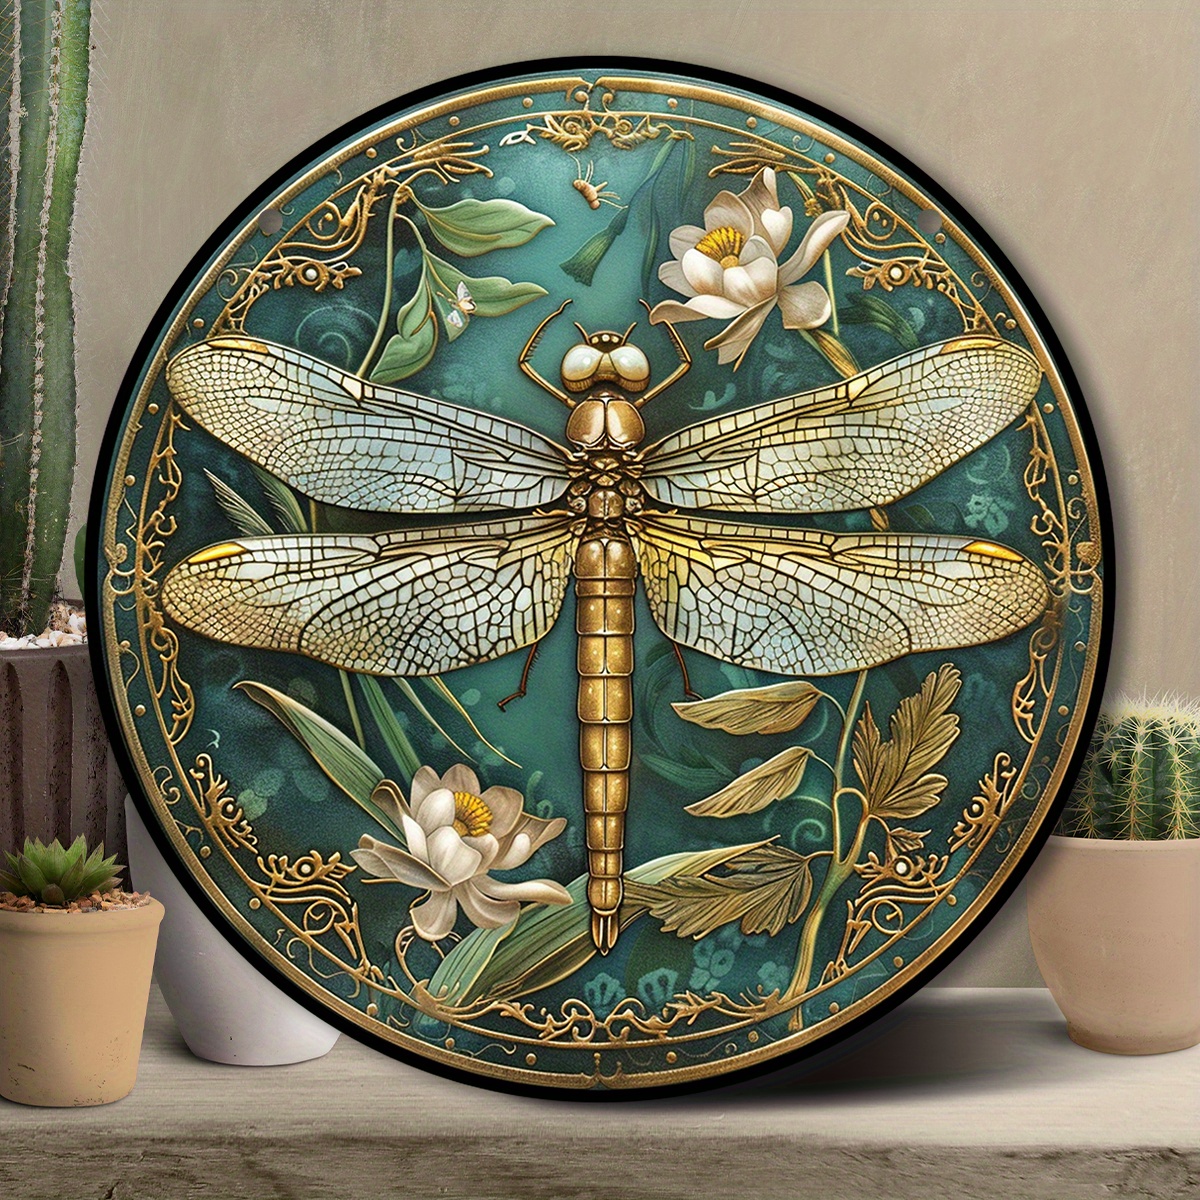 Dragonfly Sign, Dragonfly Gifts, Metal Dragonfly Sign, Wreath Sign,  Decorative Dragonfly -  Canada